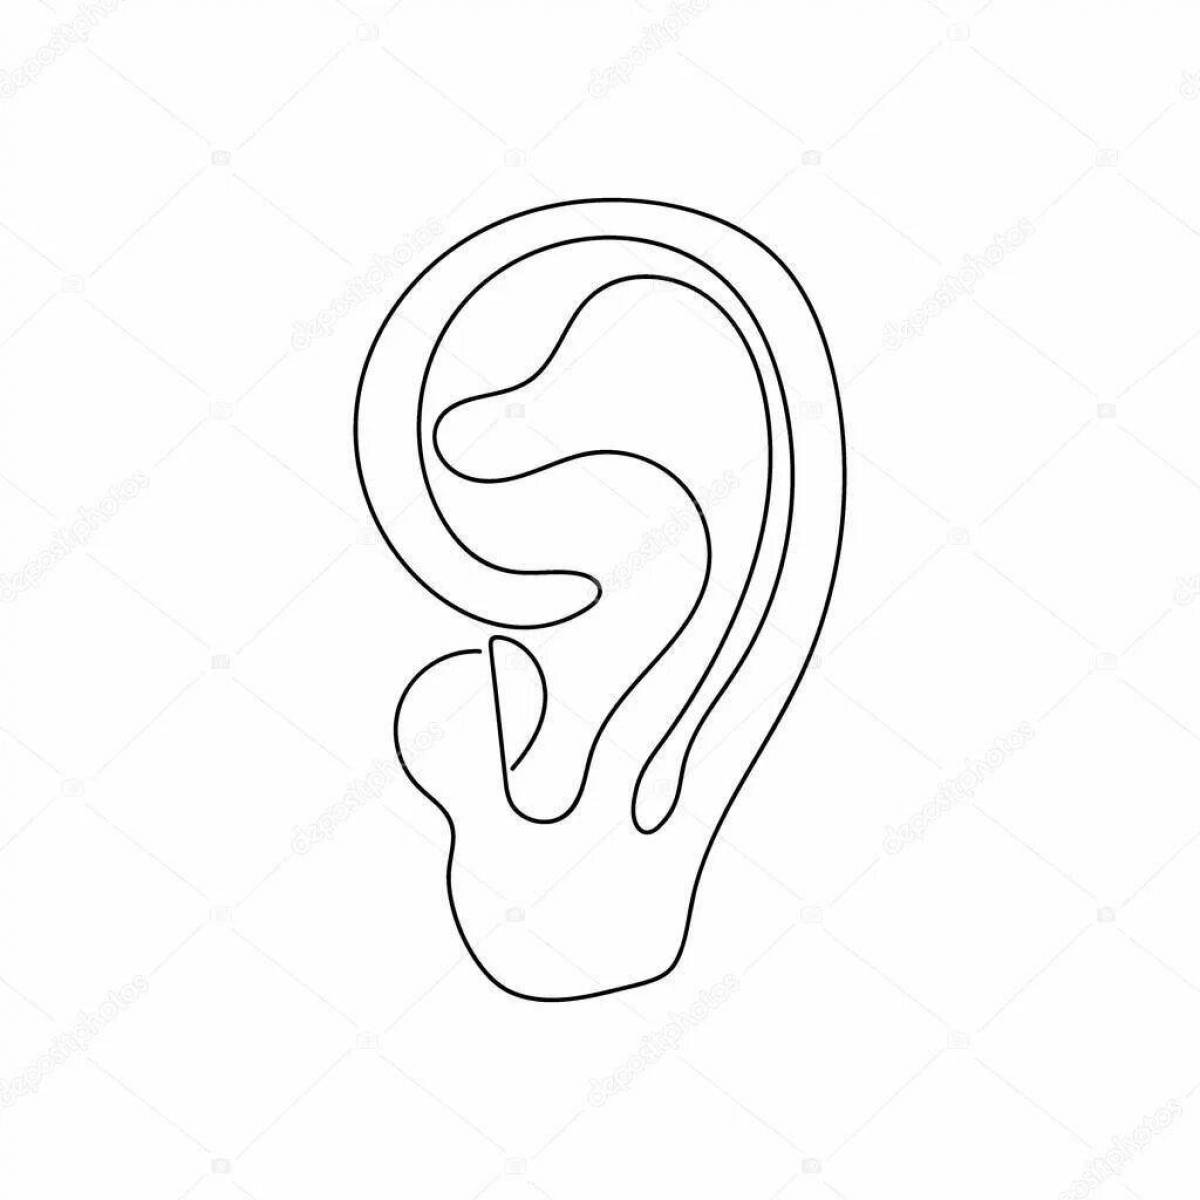 Outstanding junior ear coloring page